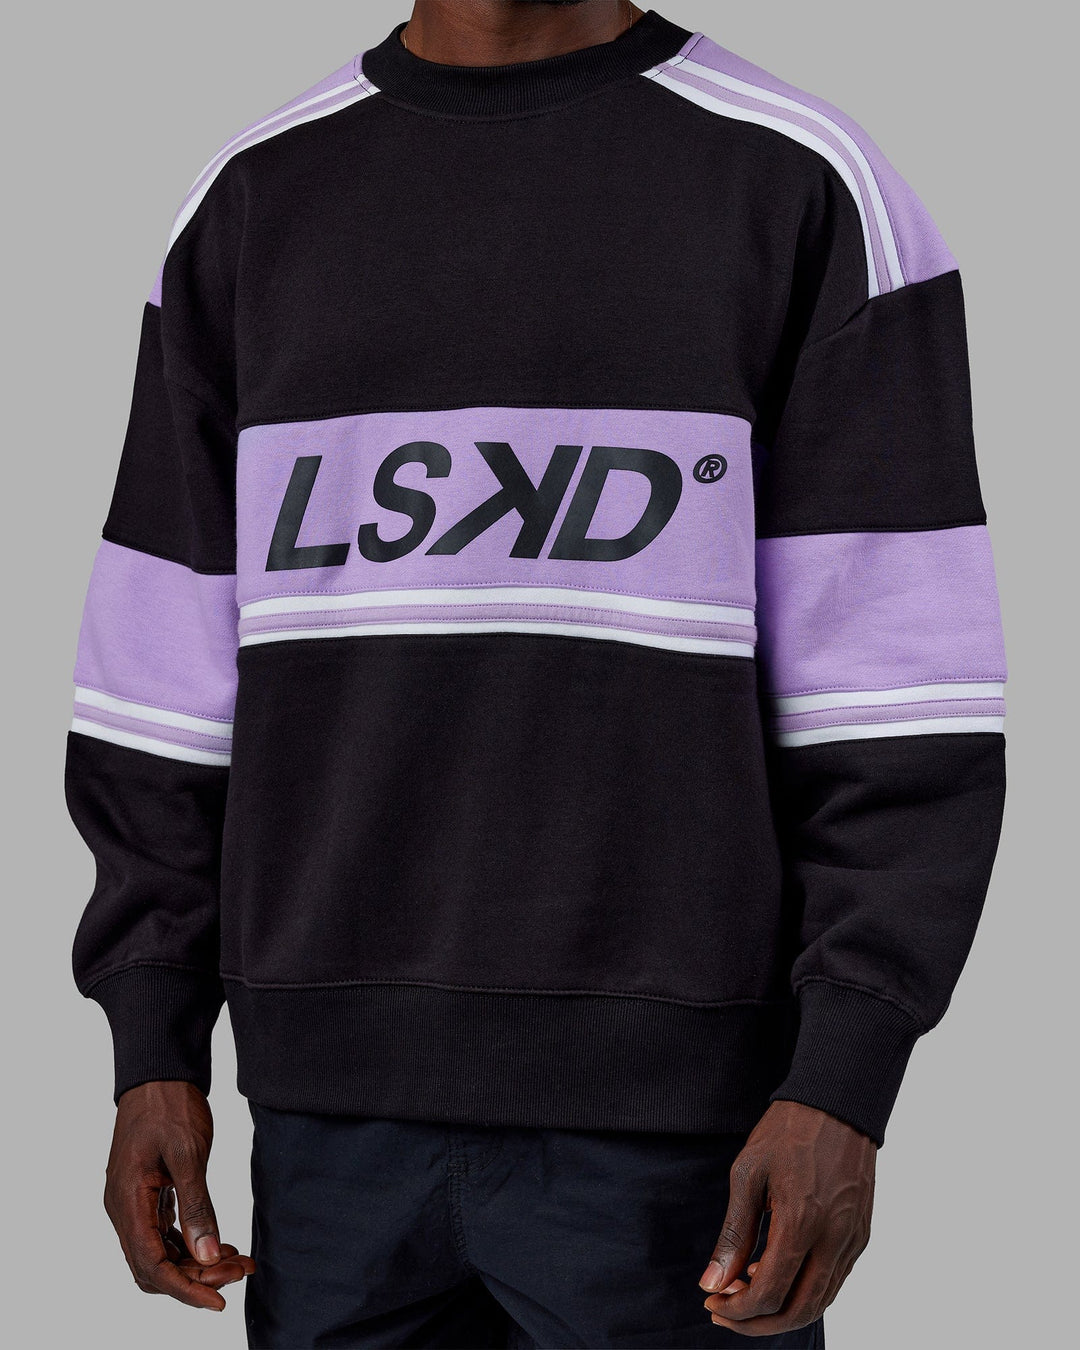 Man wearing Unisex A-Team Sweater Oversize - Black-Pale Lilac